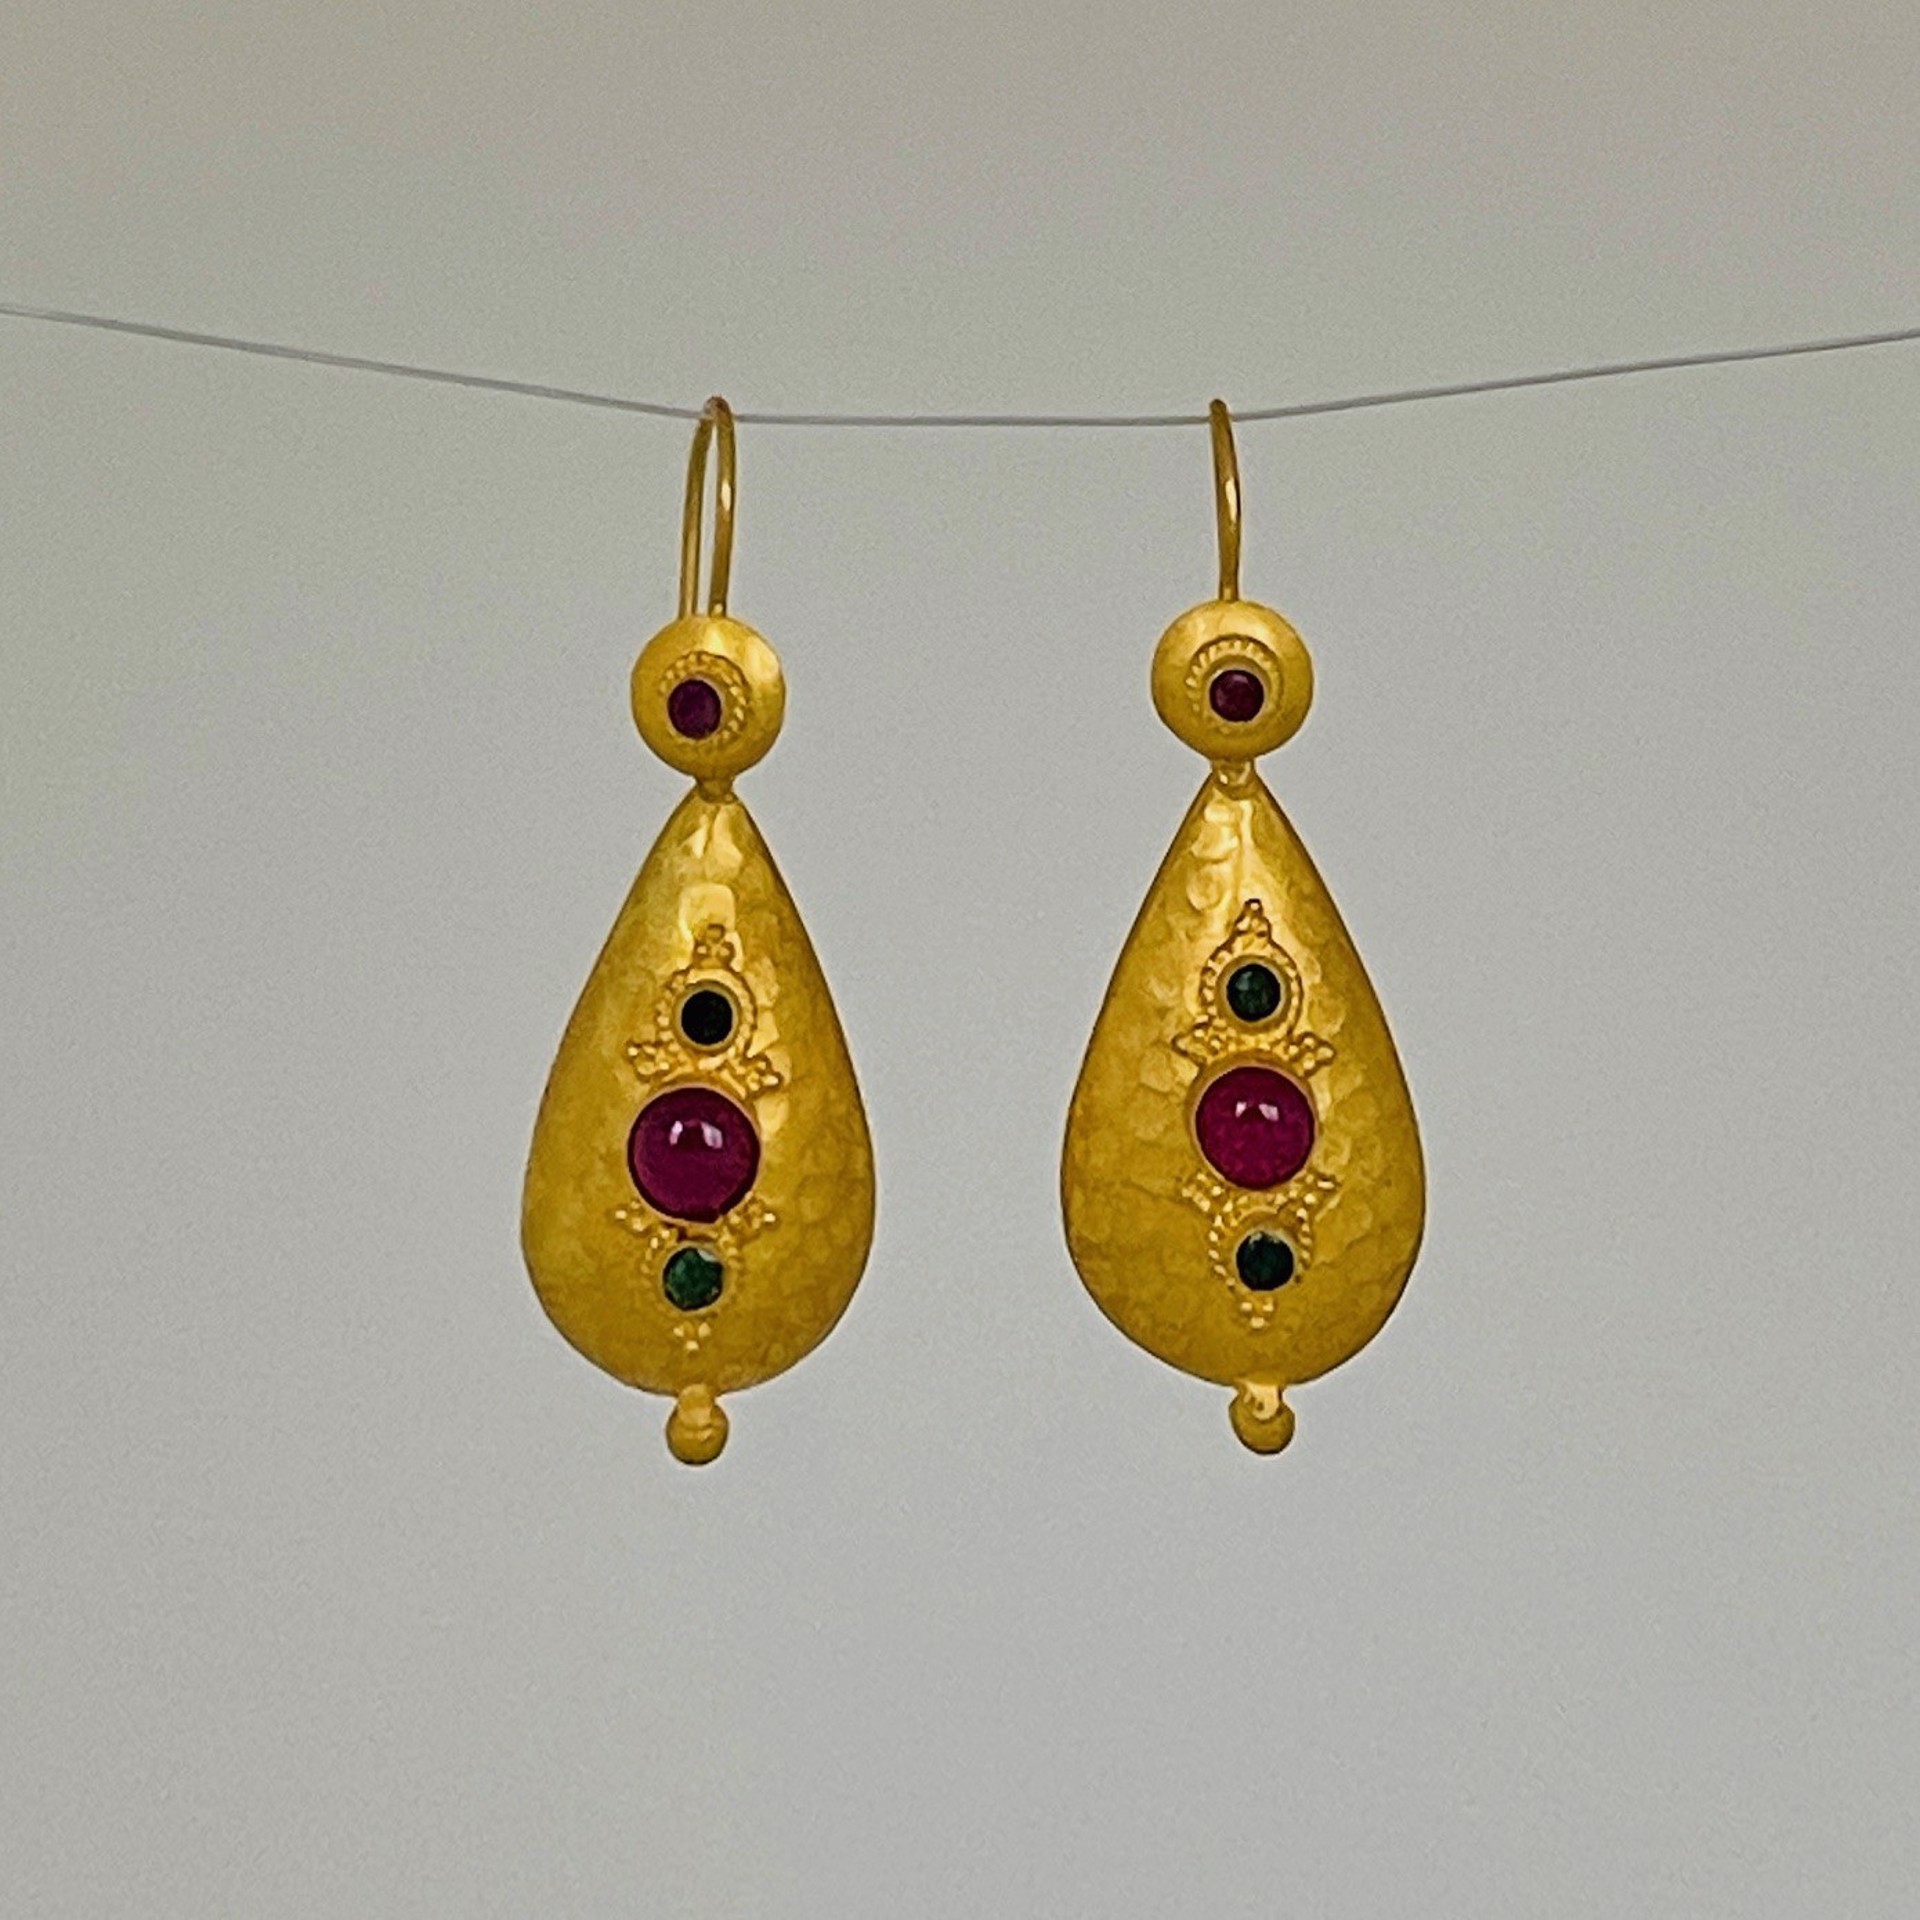 Hand Hammered Tear Drop Earrings- 18k Gold, Ruby and Emerald Bezel Set by Mara Labell